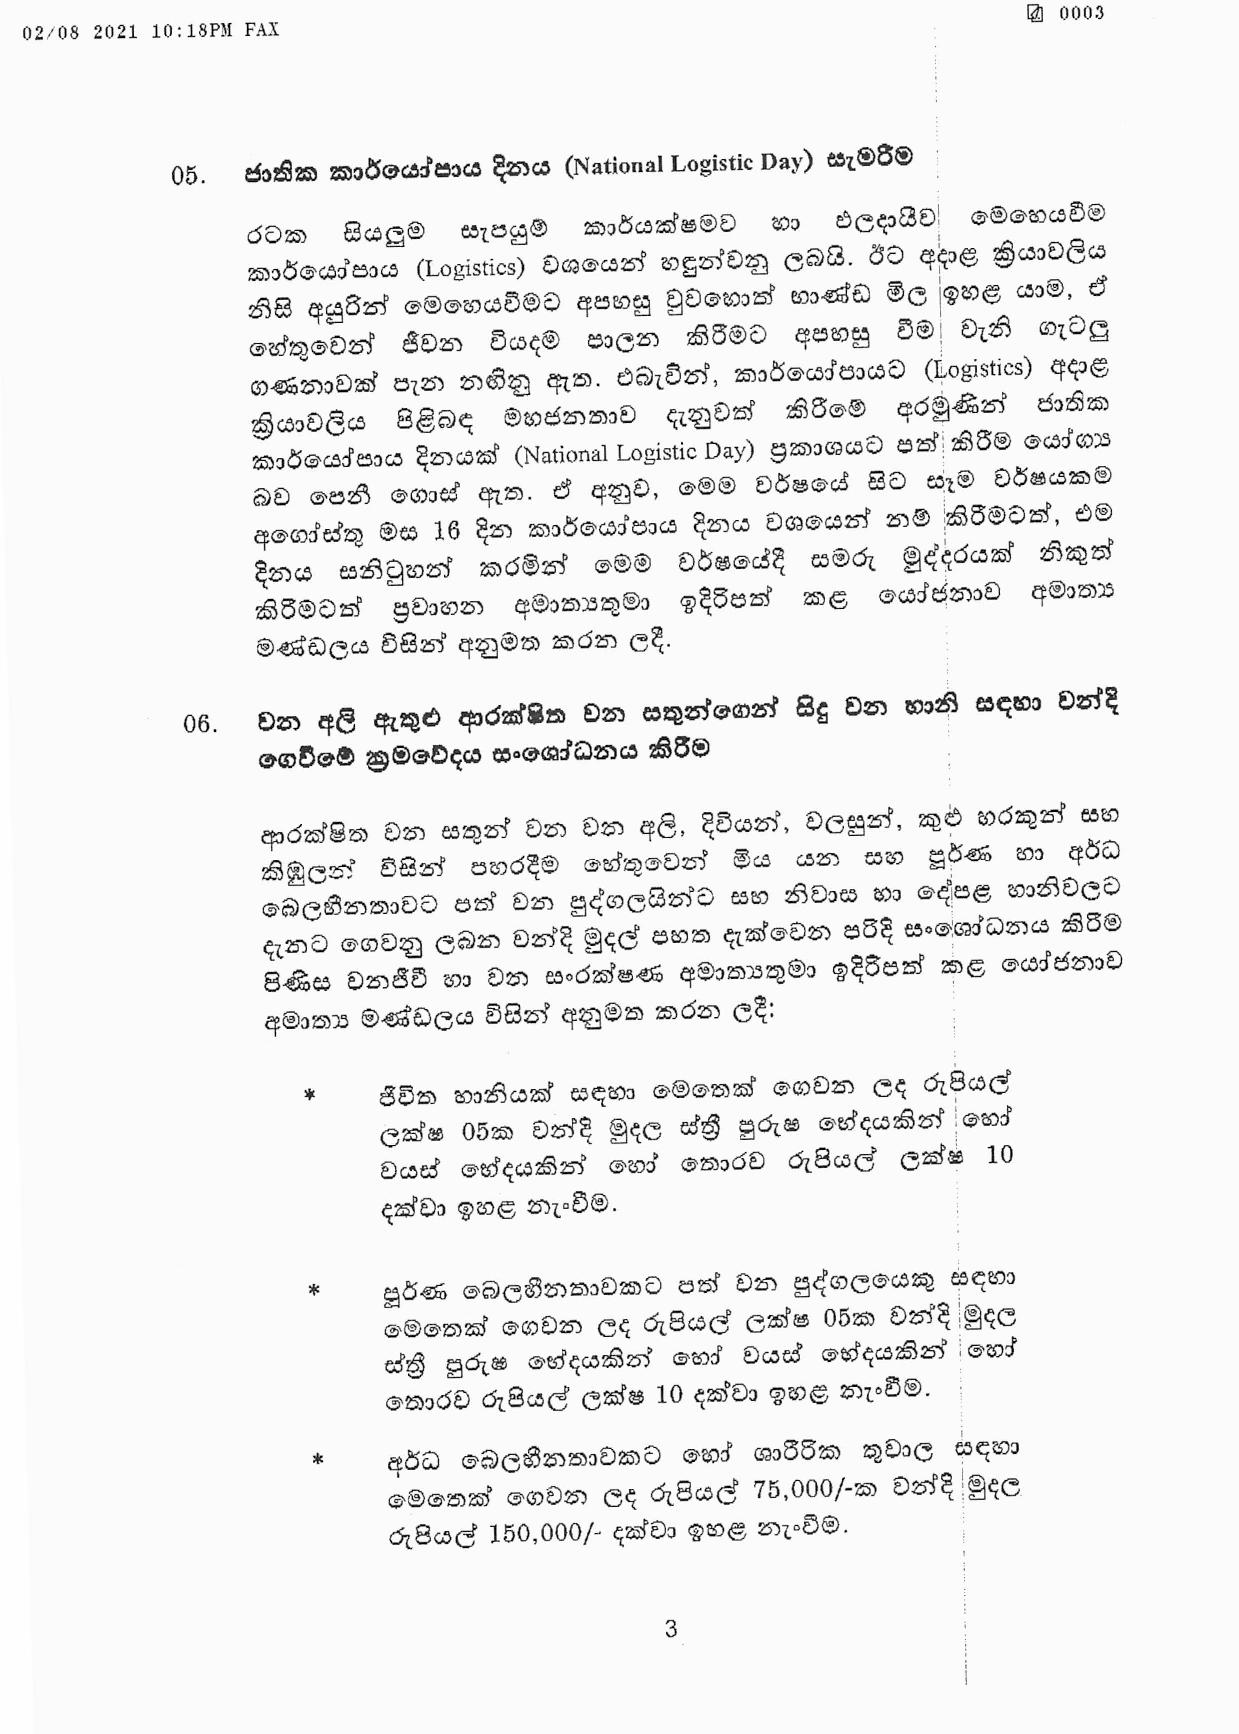 Cabinet Decisions on 02.08.2021 page 001